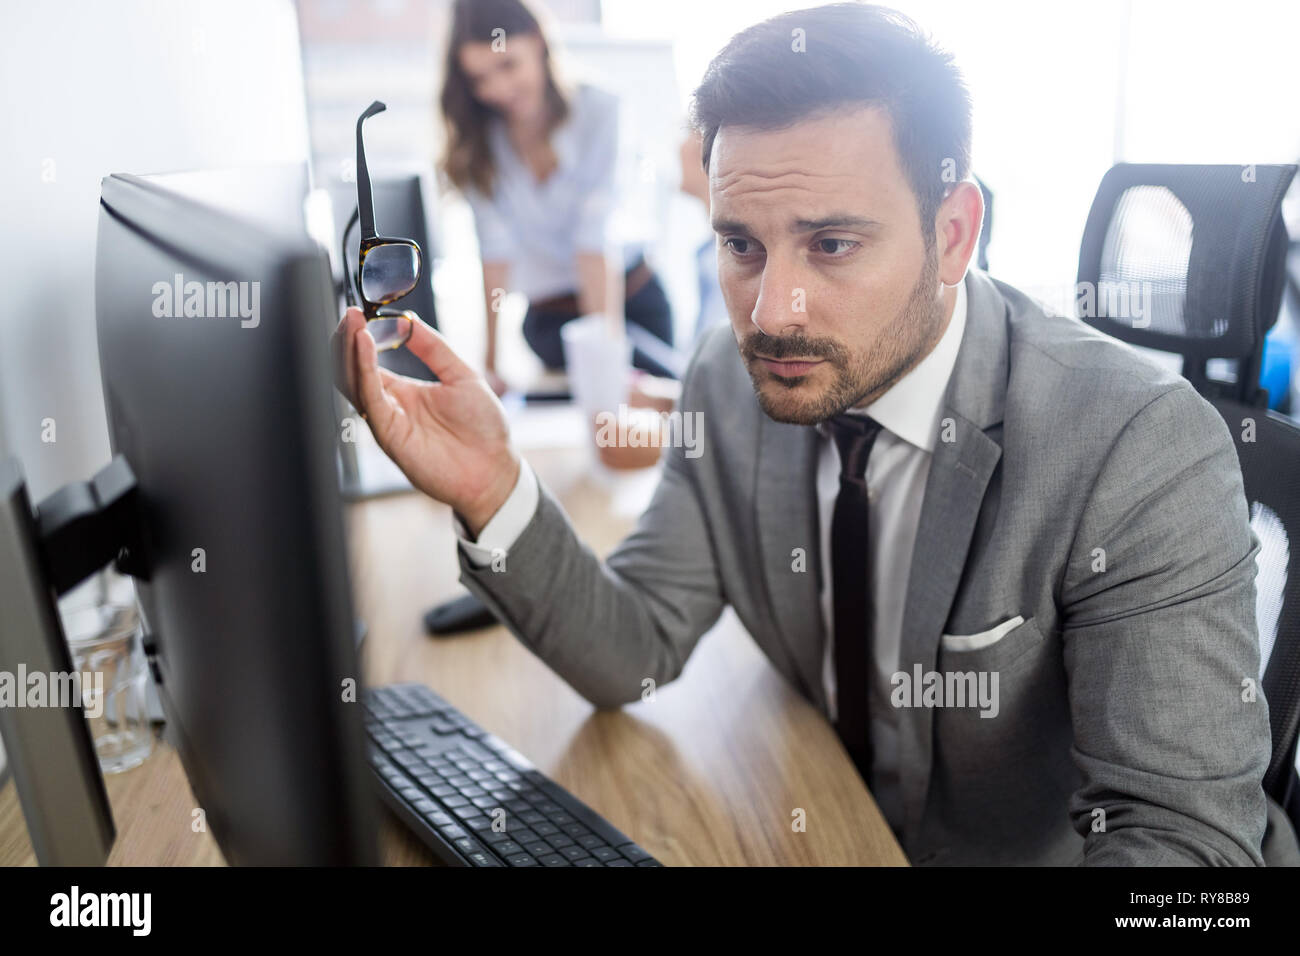 Group of unsuccessful business people and badly managed company leads to unhappiness Stock Photo